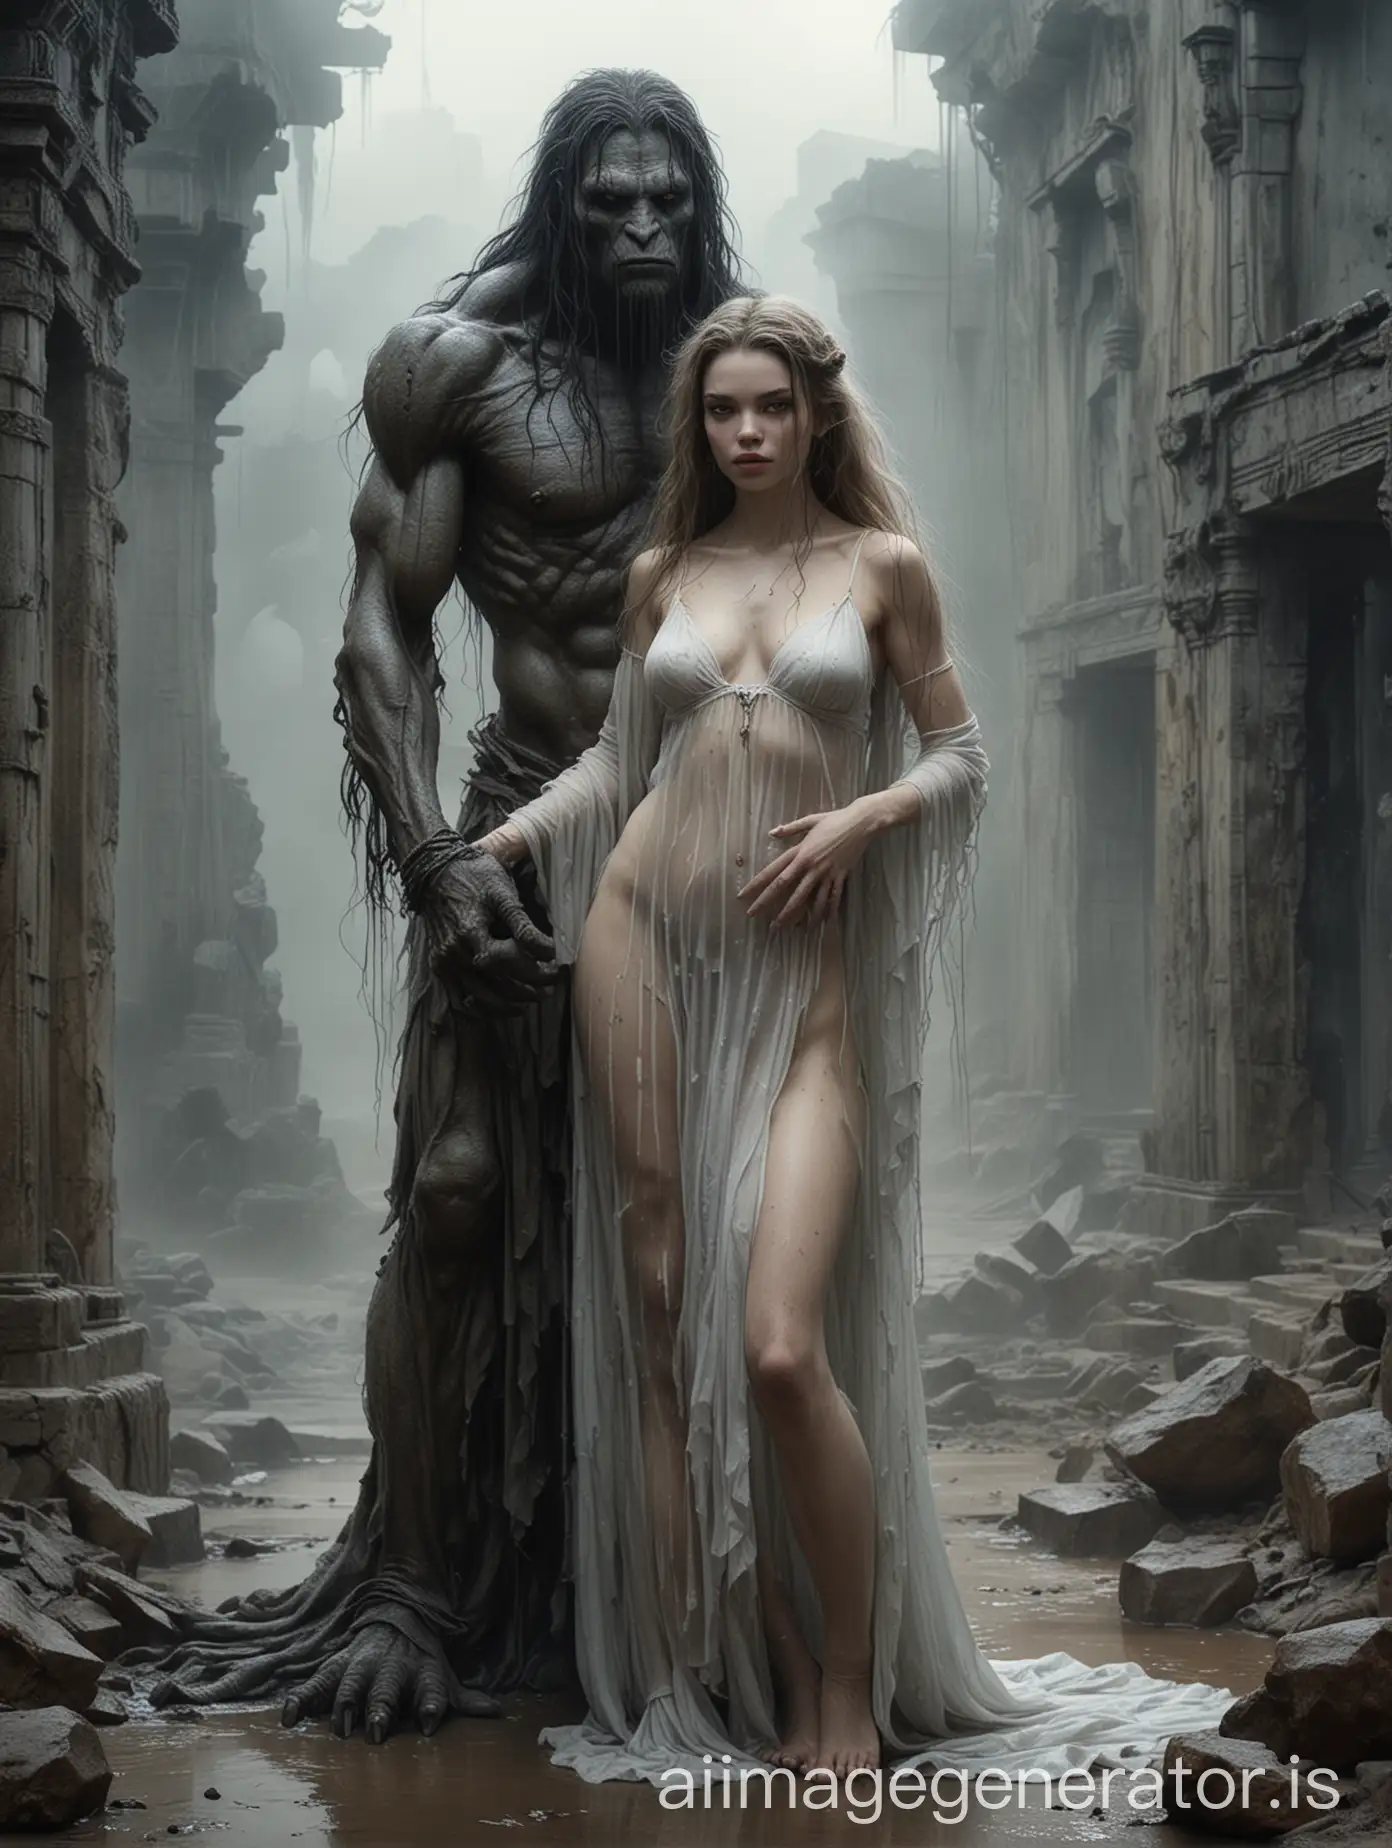 portrait, luis royo dark art style, anya taylor-joy face, tall huge troll man creature and woman in love,  troll man grabbing woman with both huge hands, woman in translucent nightgown, wet ground, ancient ruins blurry foggy background